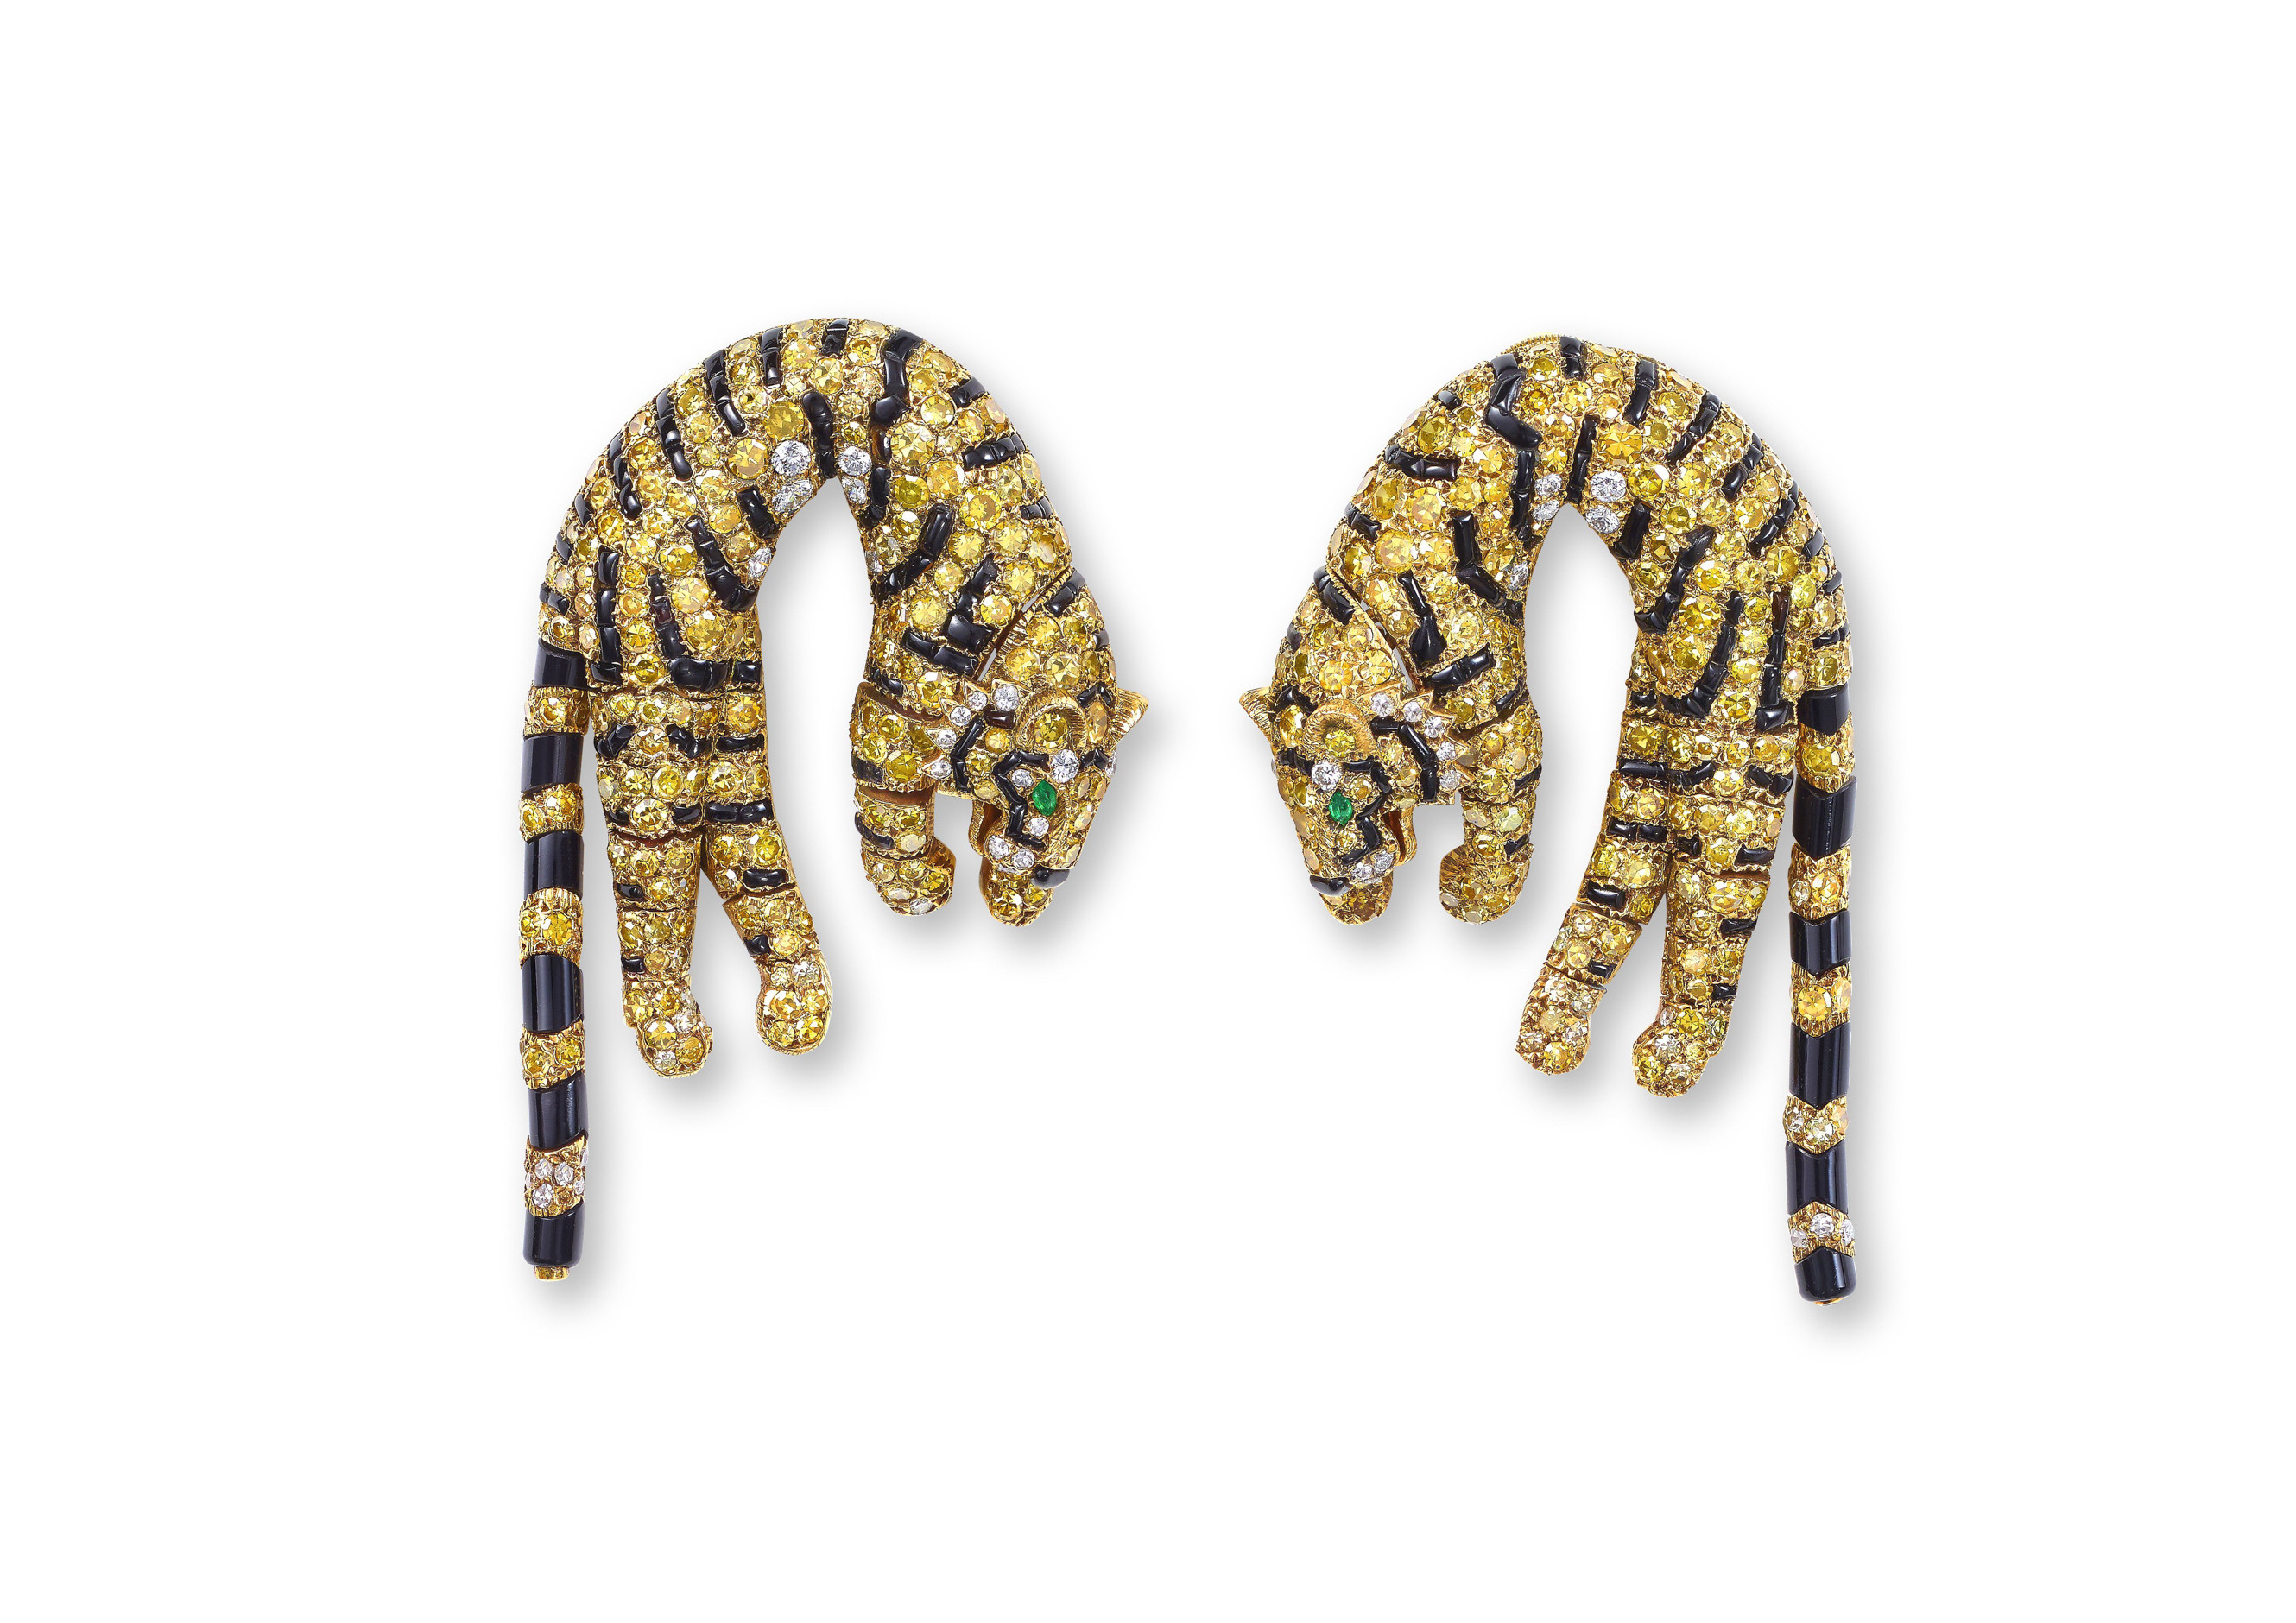 A pair of tiger ear clips owned by Barbara Hutton (1912-1979), heiress of the US retail tycoon Frank Woolworth, part of the “Cartier and Women” exhibition at the Hong Kong Palace Museum. Photo: Nils Herrmann  / Collection Cartier